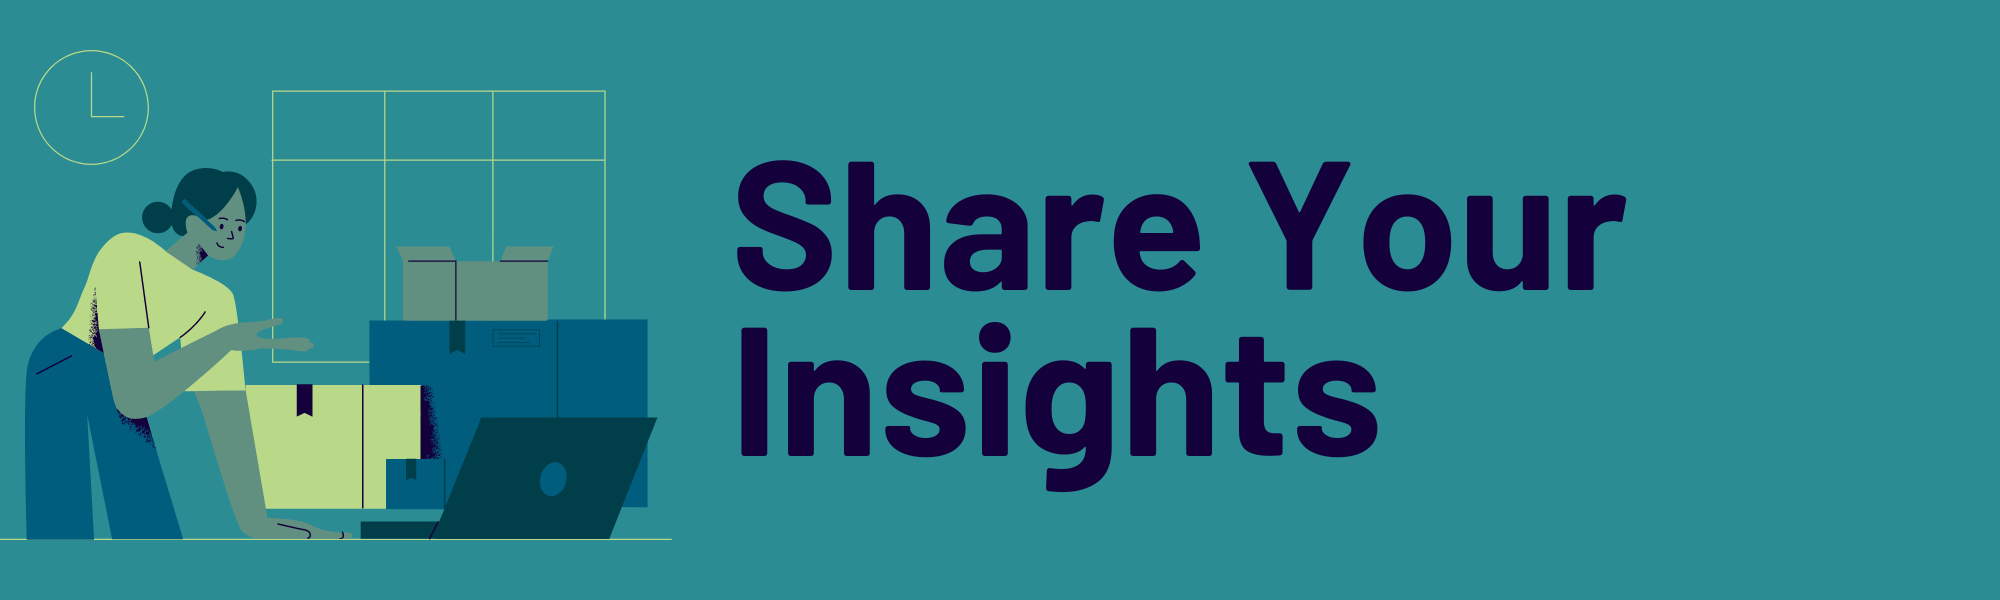 MFP-Share-Your-Insights-Button.png